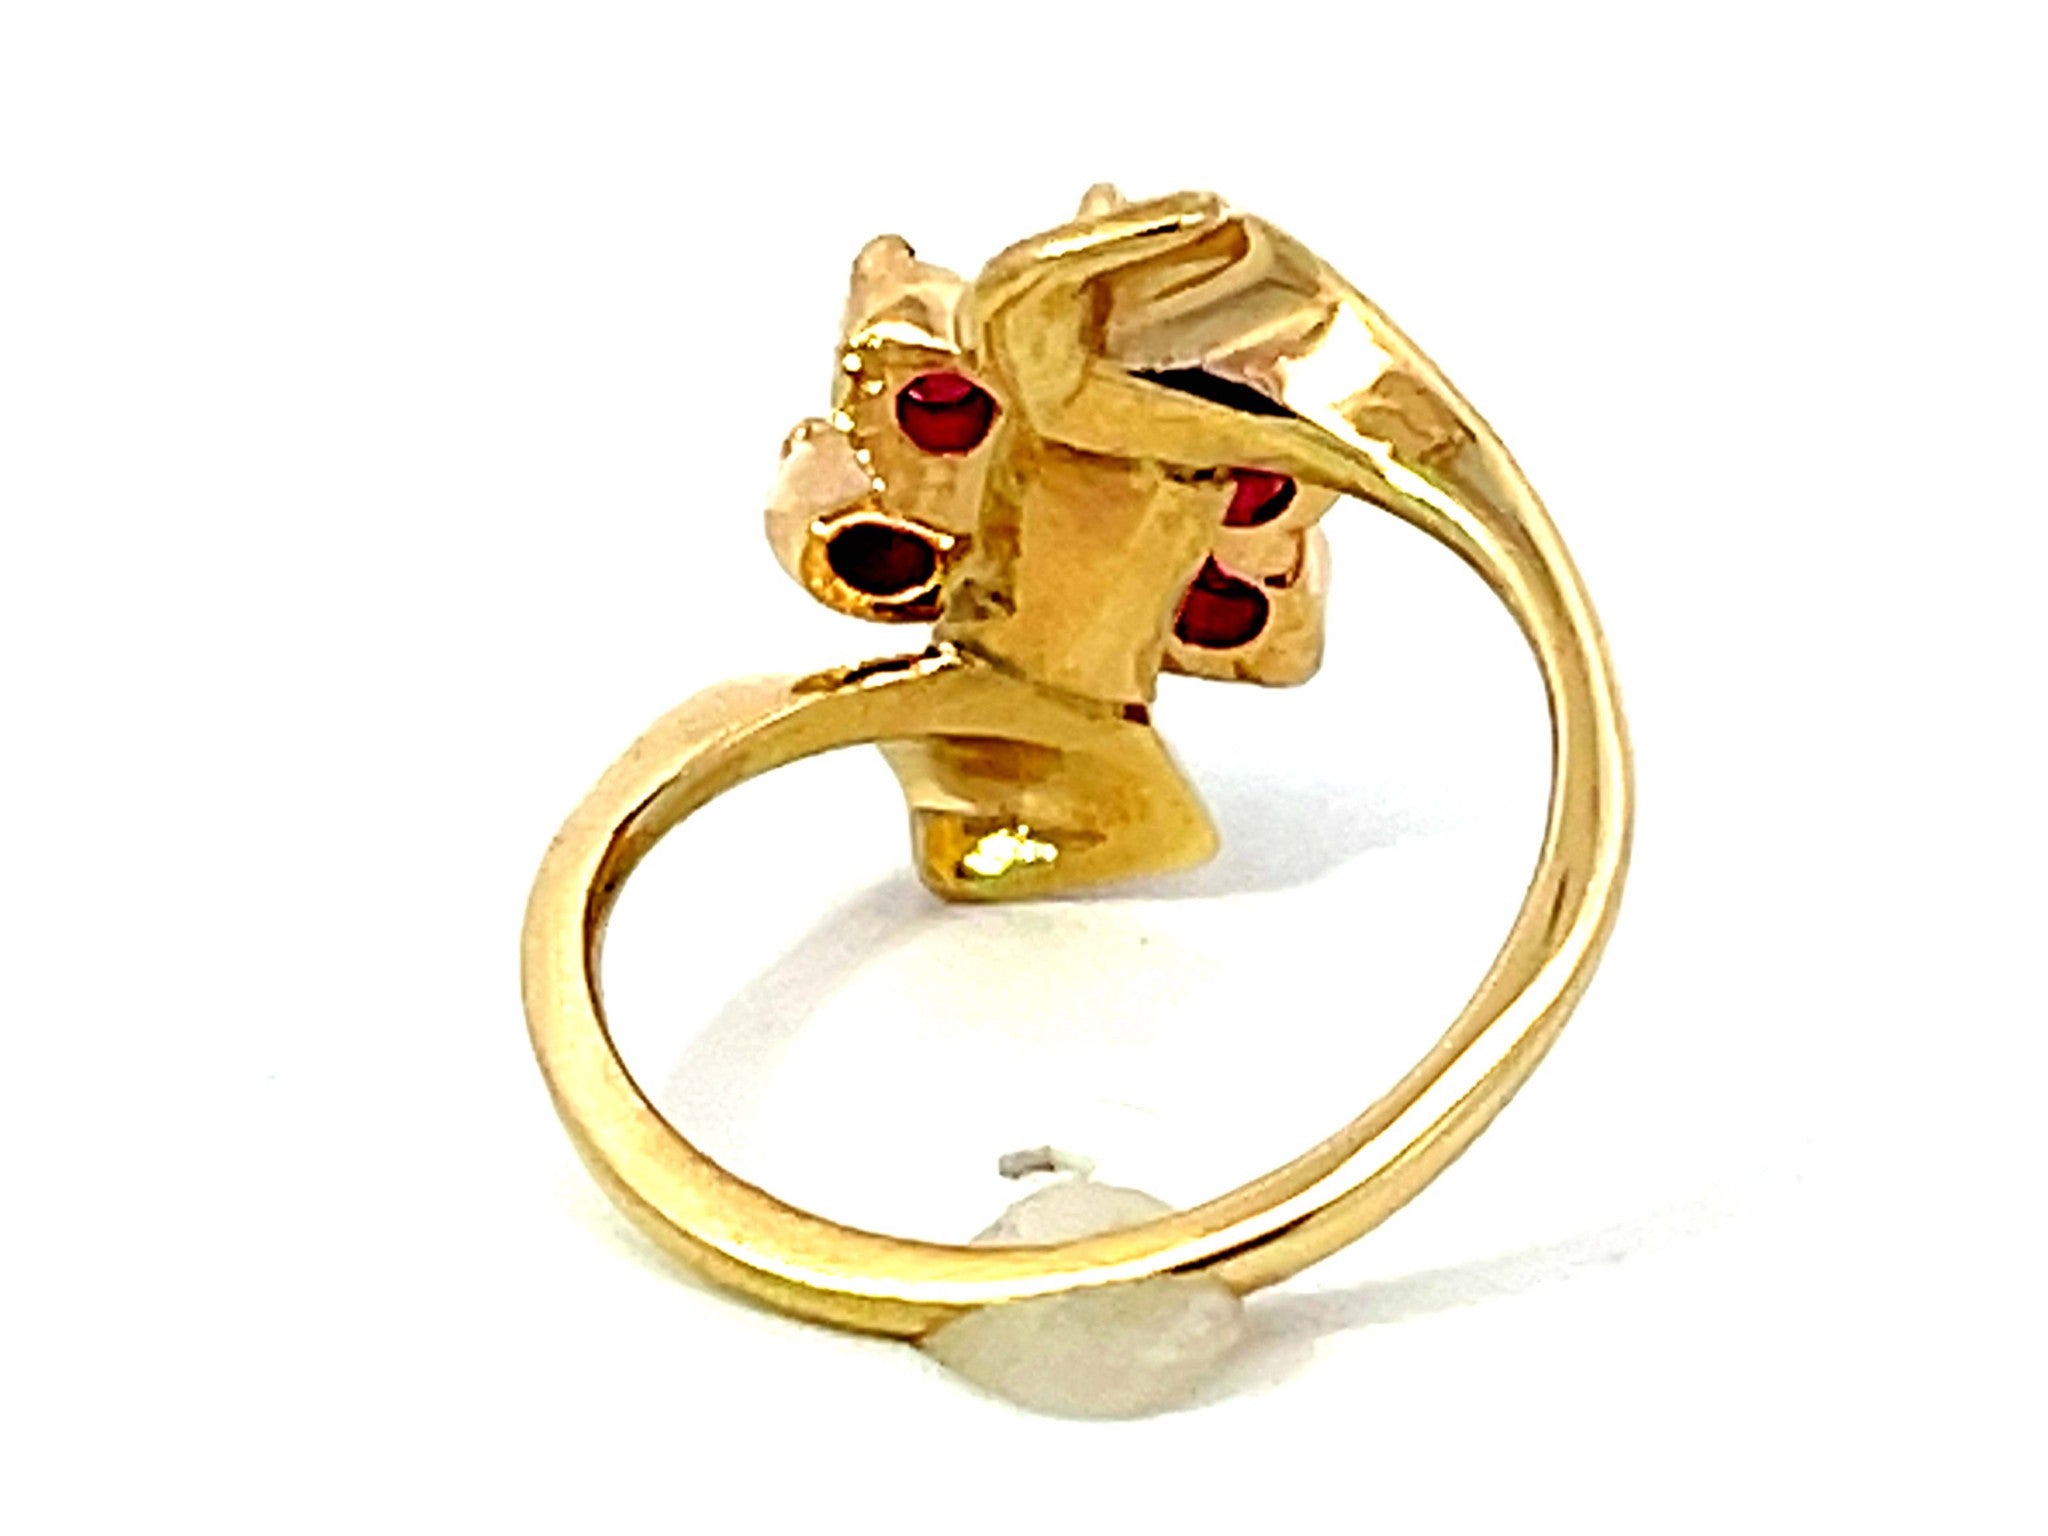 Ruby Flower and Diamond Center Ring in 14k Yellow Gold